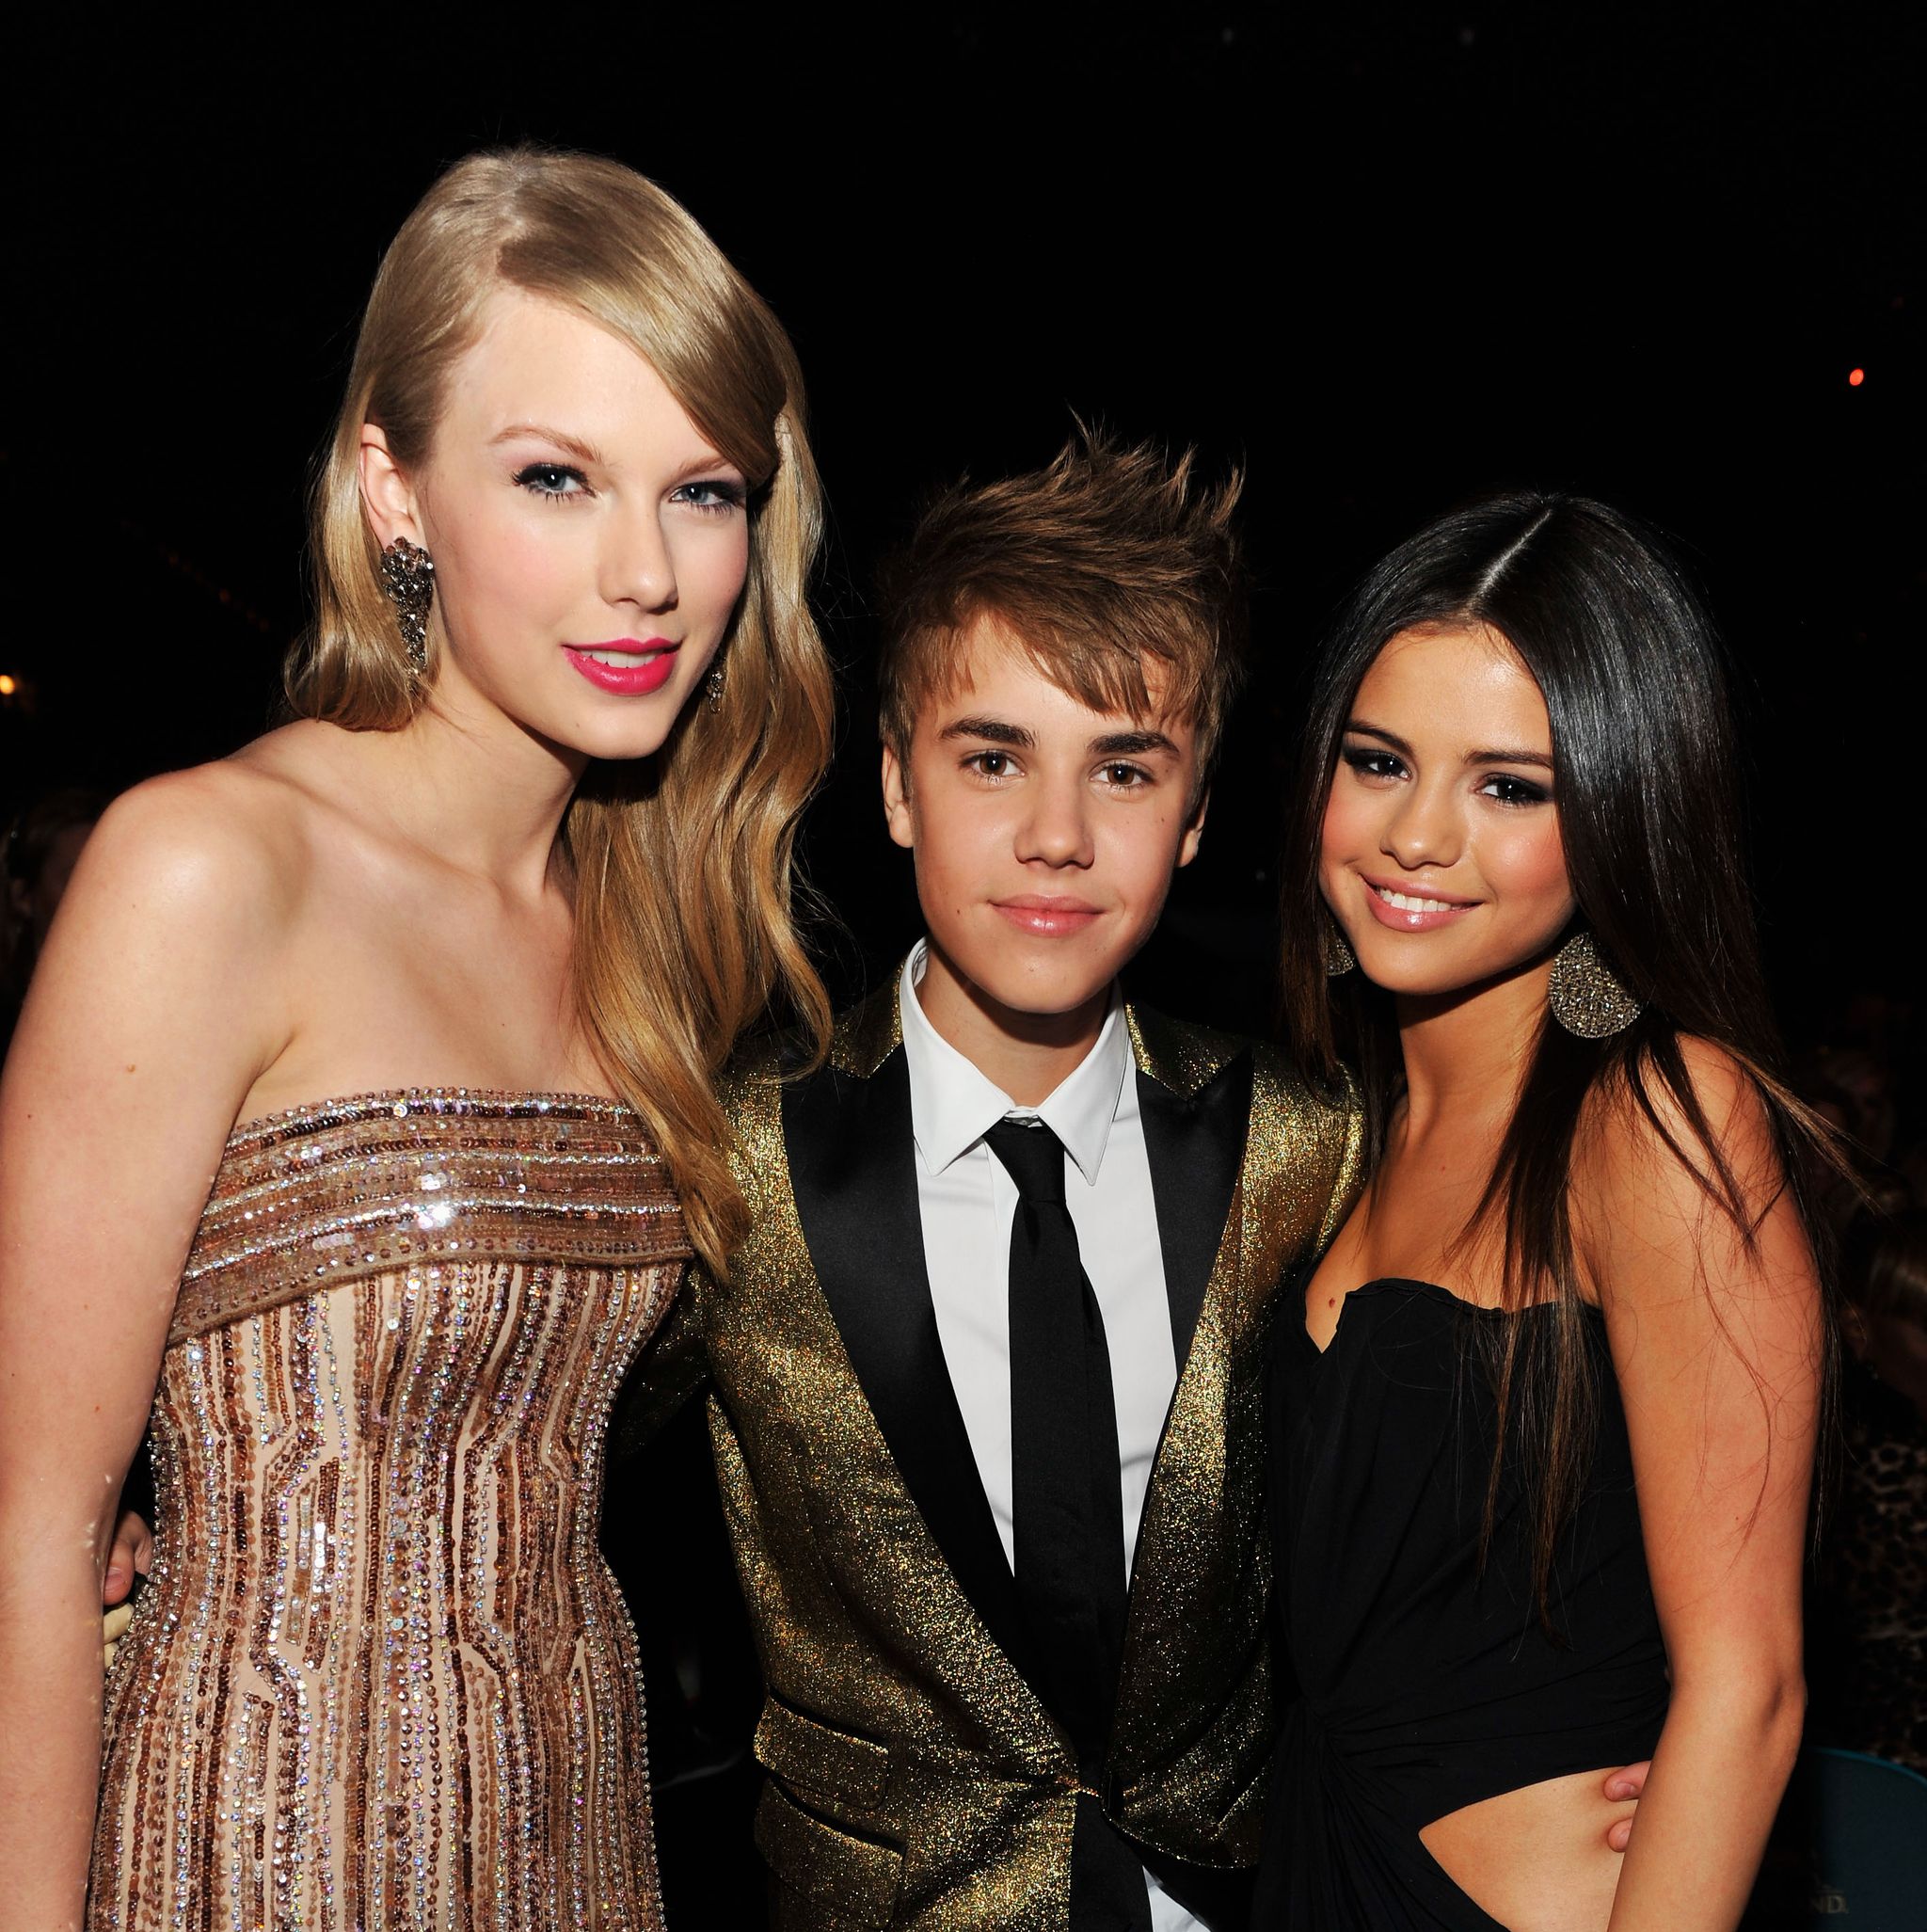 Taylor Swift Confirms Justin Bieber Cheated On Selena Gomez